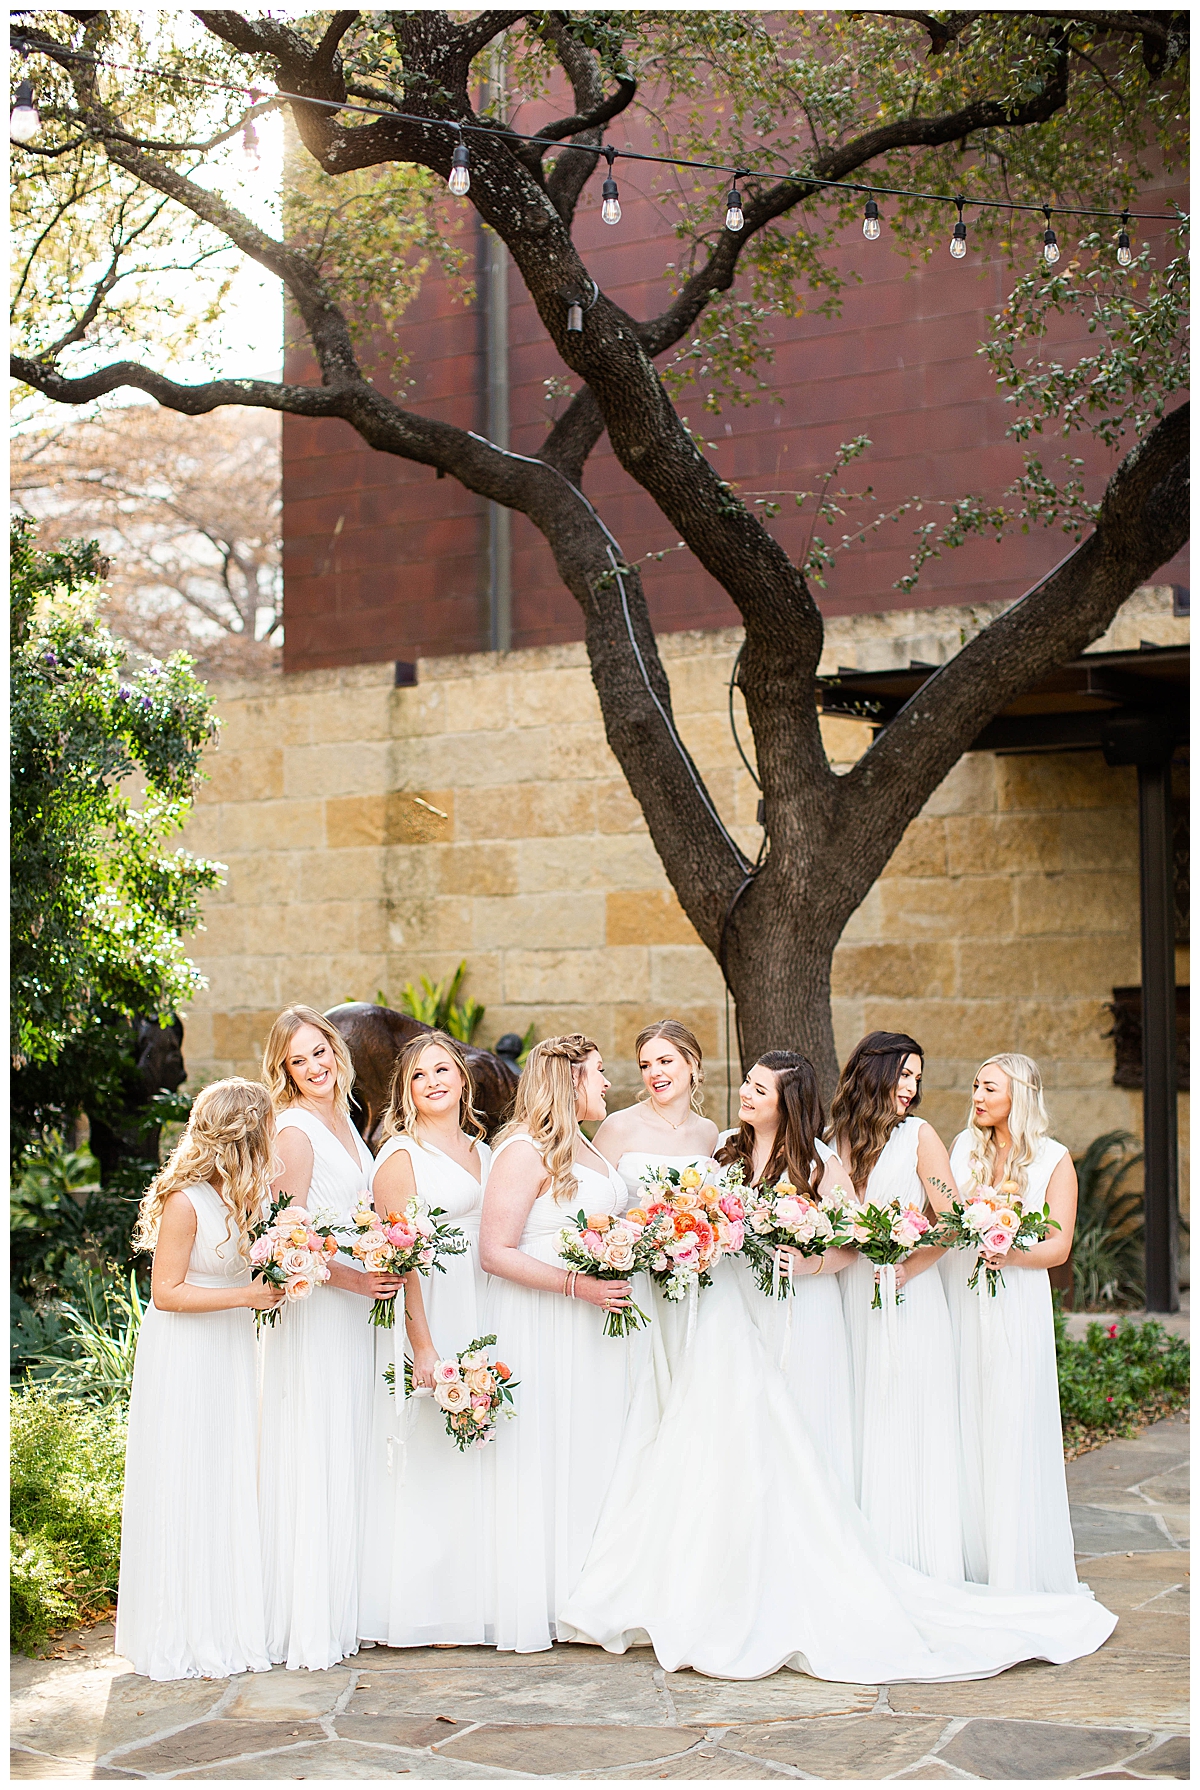 Bridesmaids in white dresses smile and laugh with their bouquets. 